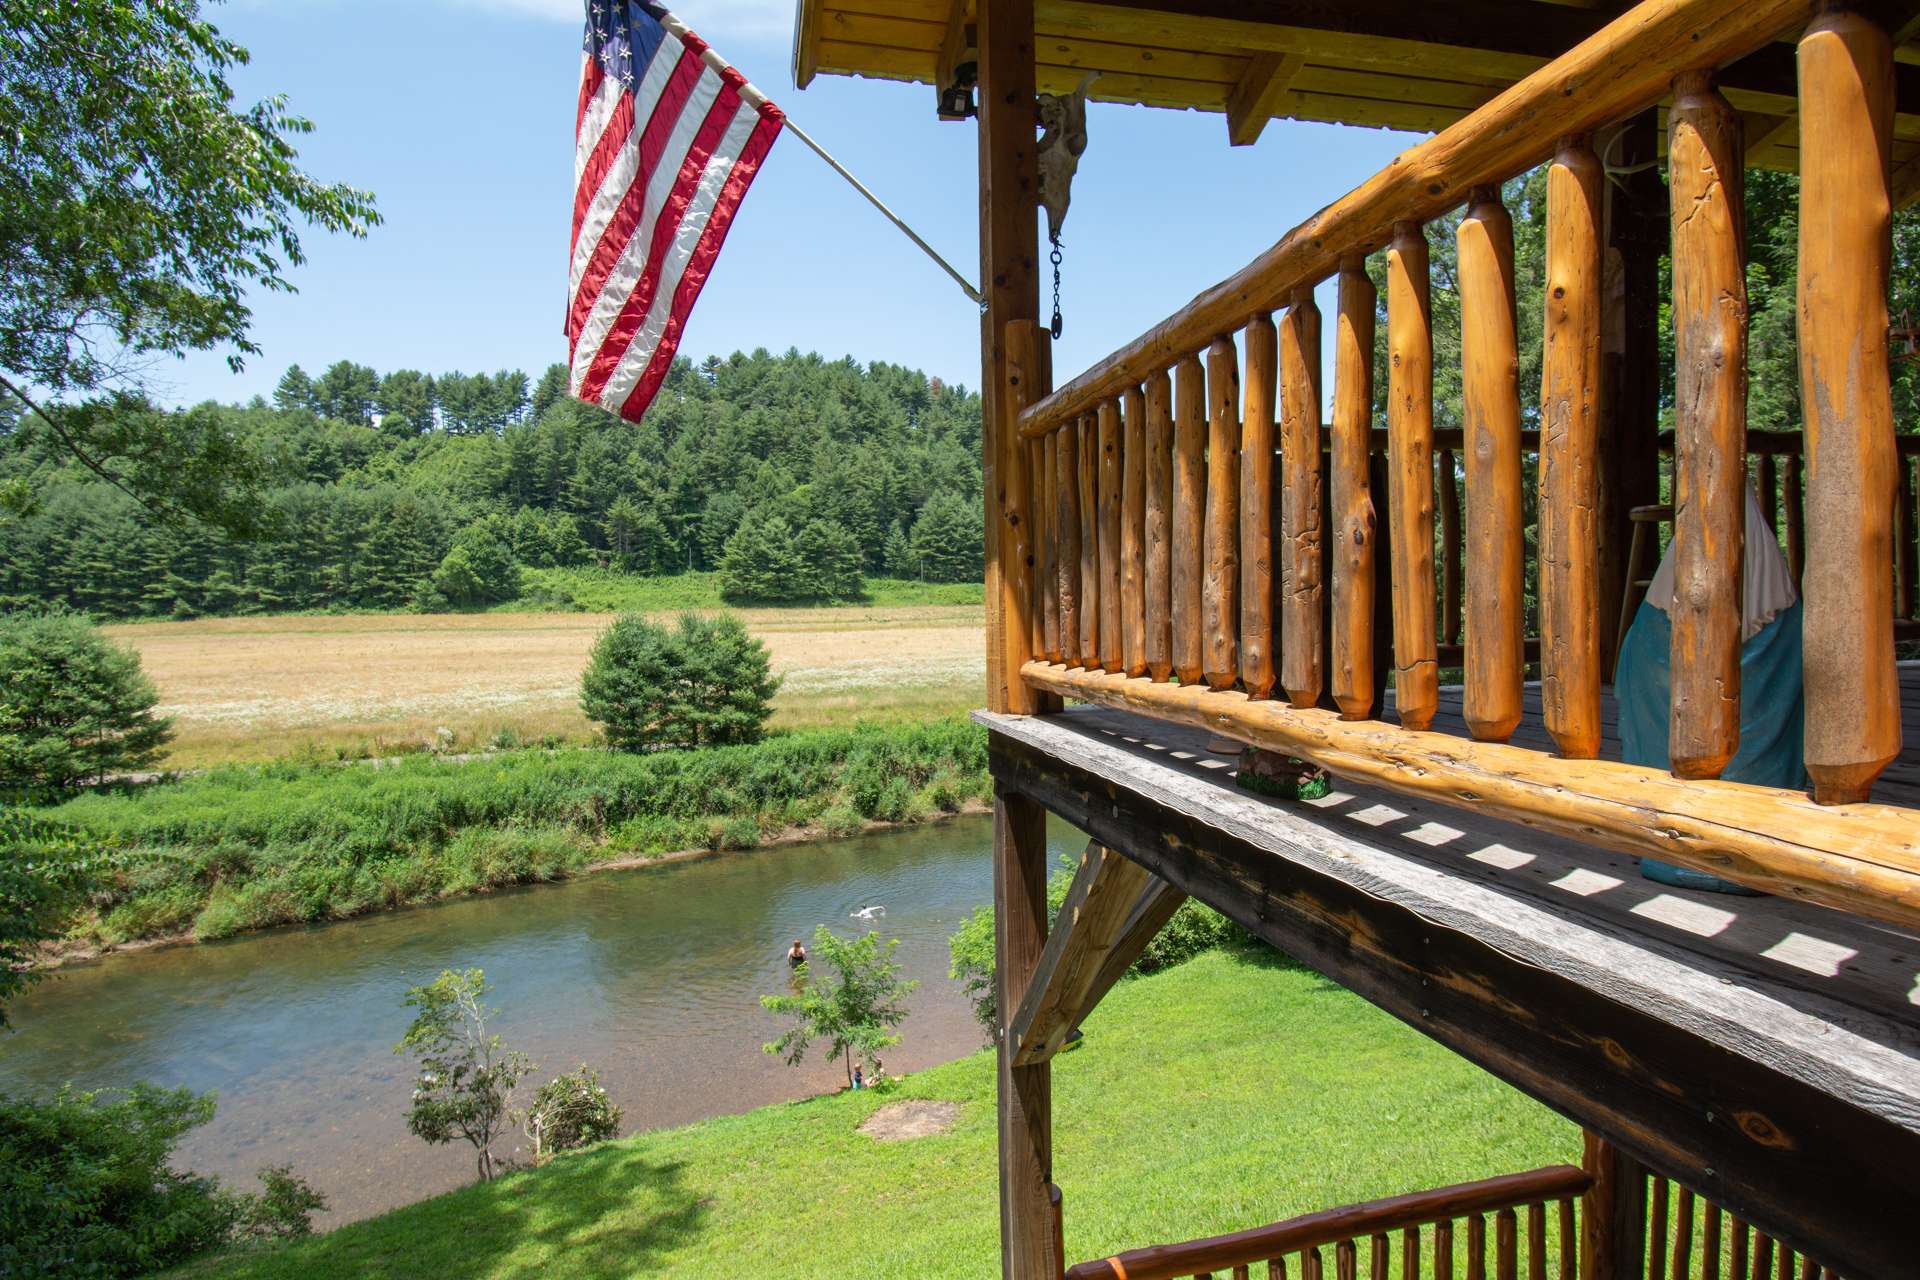 This is your chance to purchase a quality built log cabin on the banks of the New River off of Phillips Gap Road convenient to West Jefferson and the surrounding High Country.